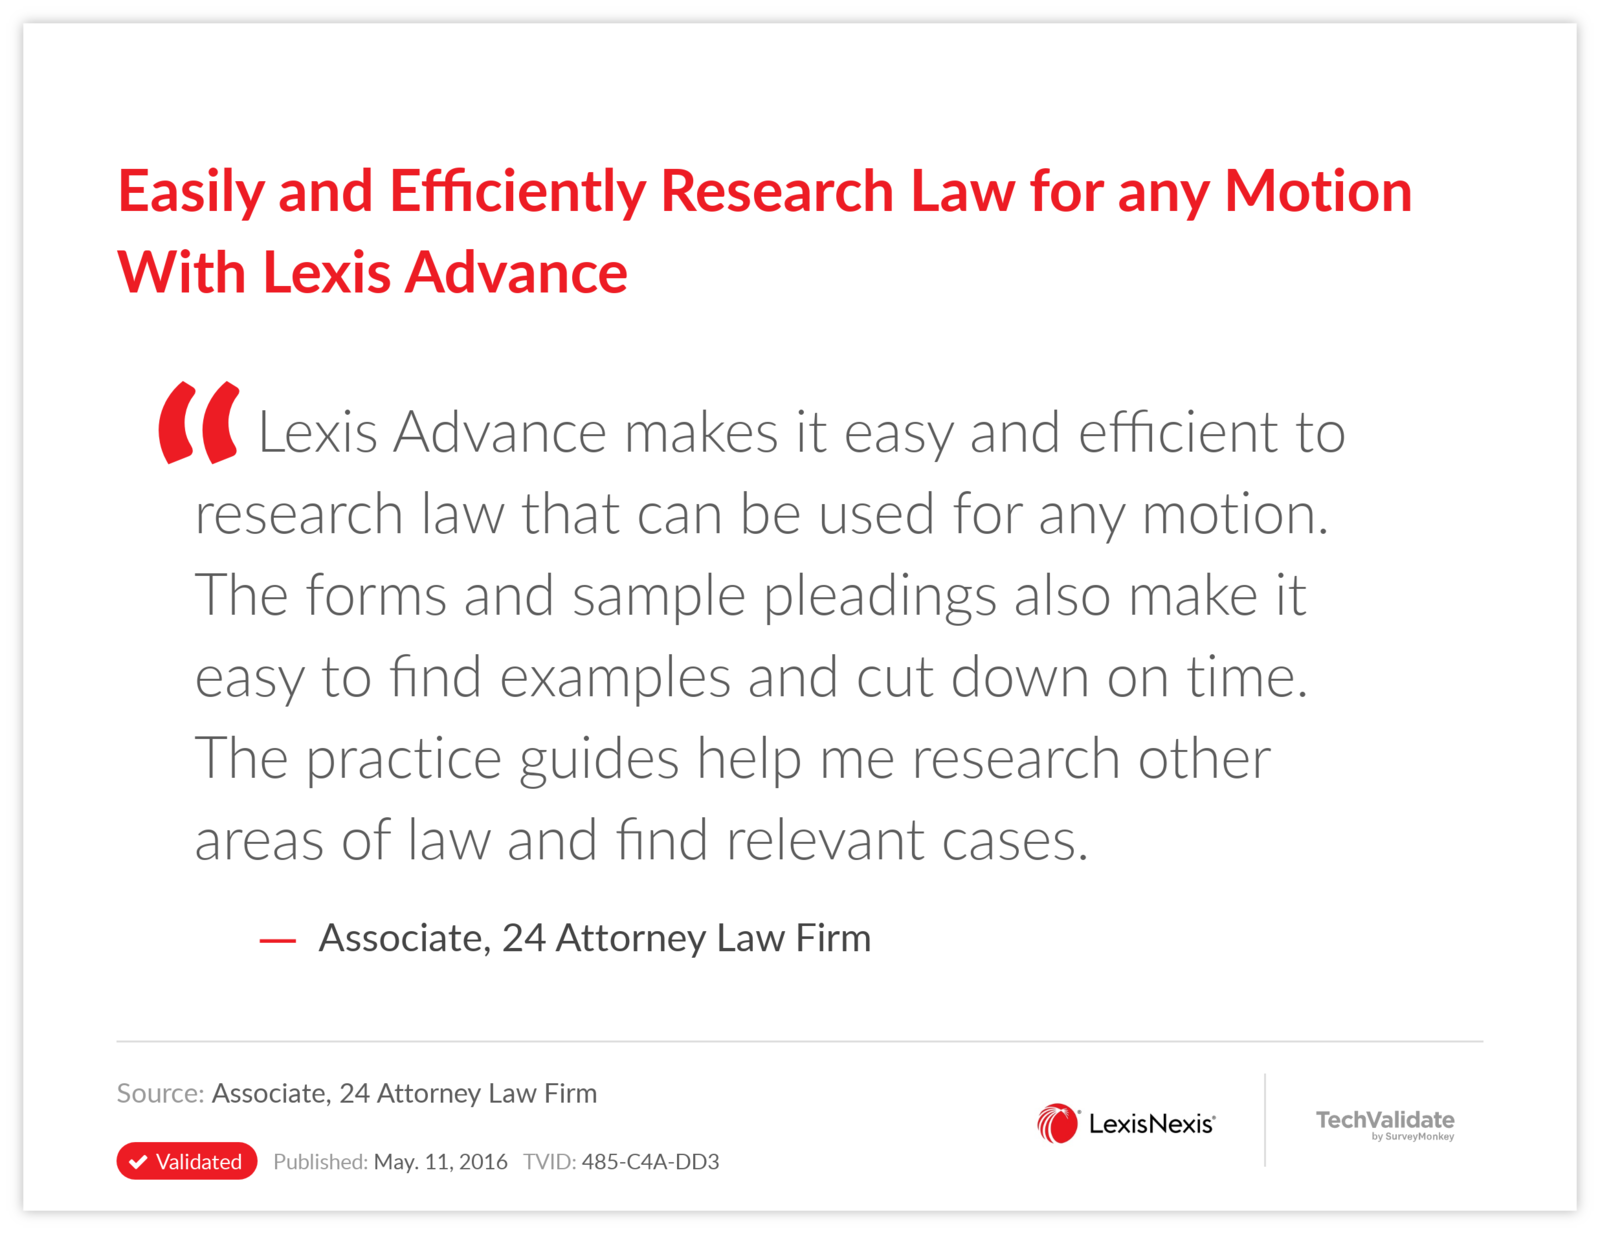 Easily and Efficiently Research Law for any Motion With Lexis Advance